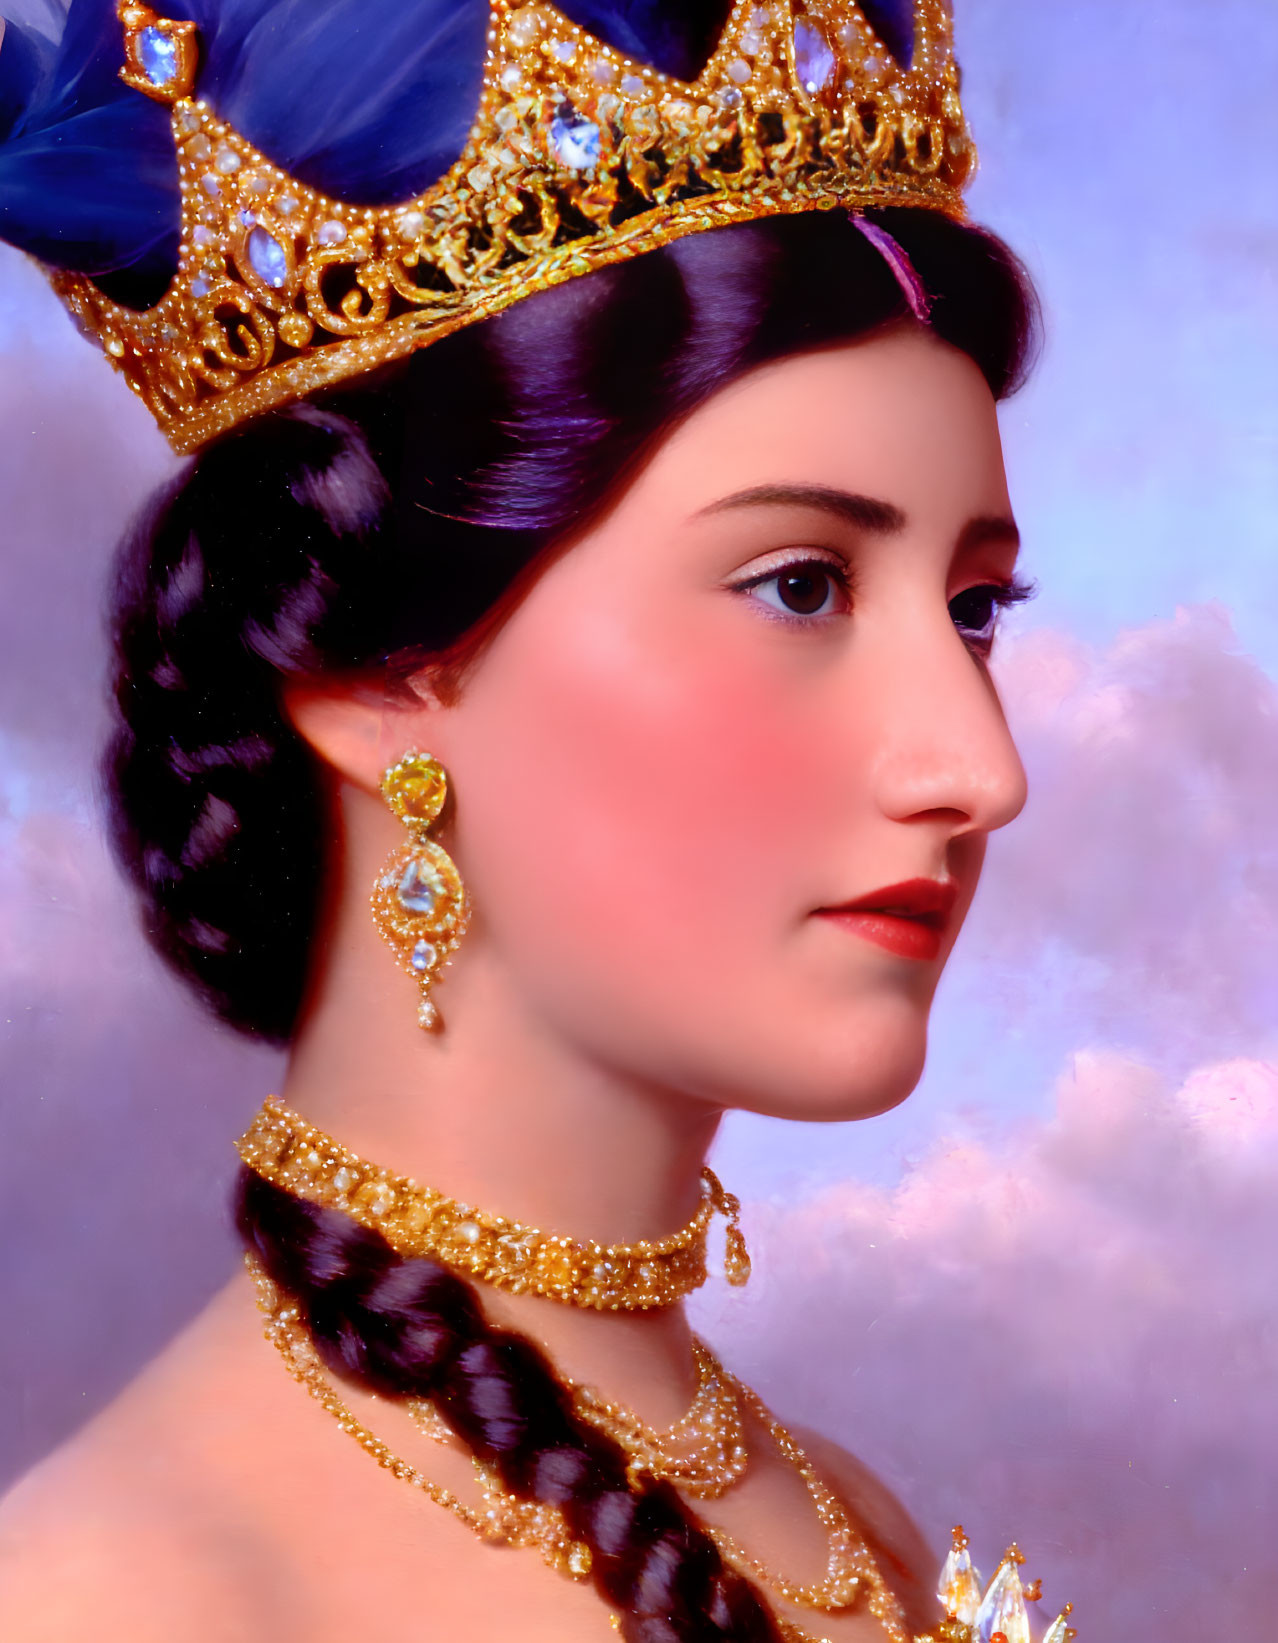 Portrait of woman with crown, side-braid, earrings, and necklace against clouded sky